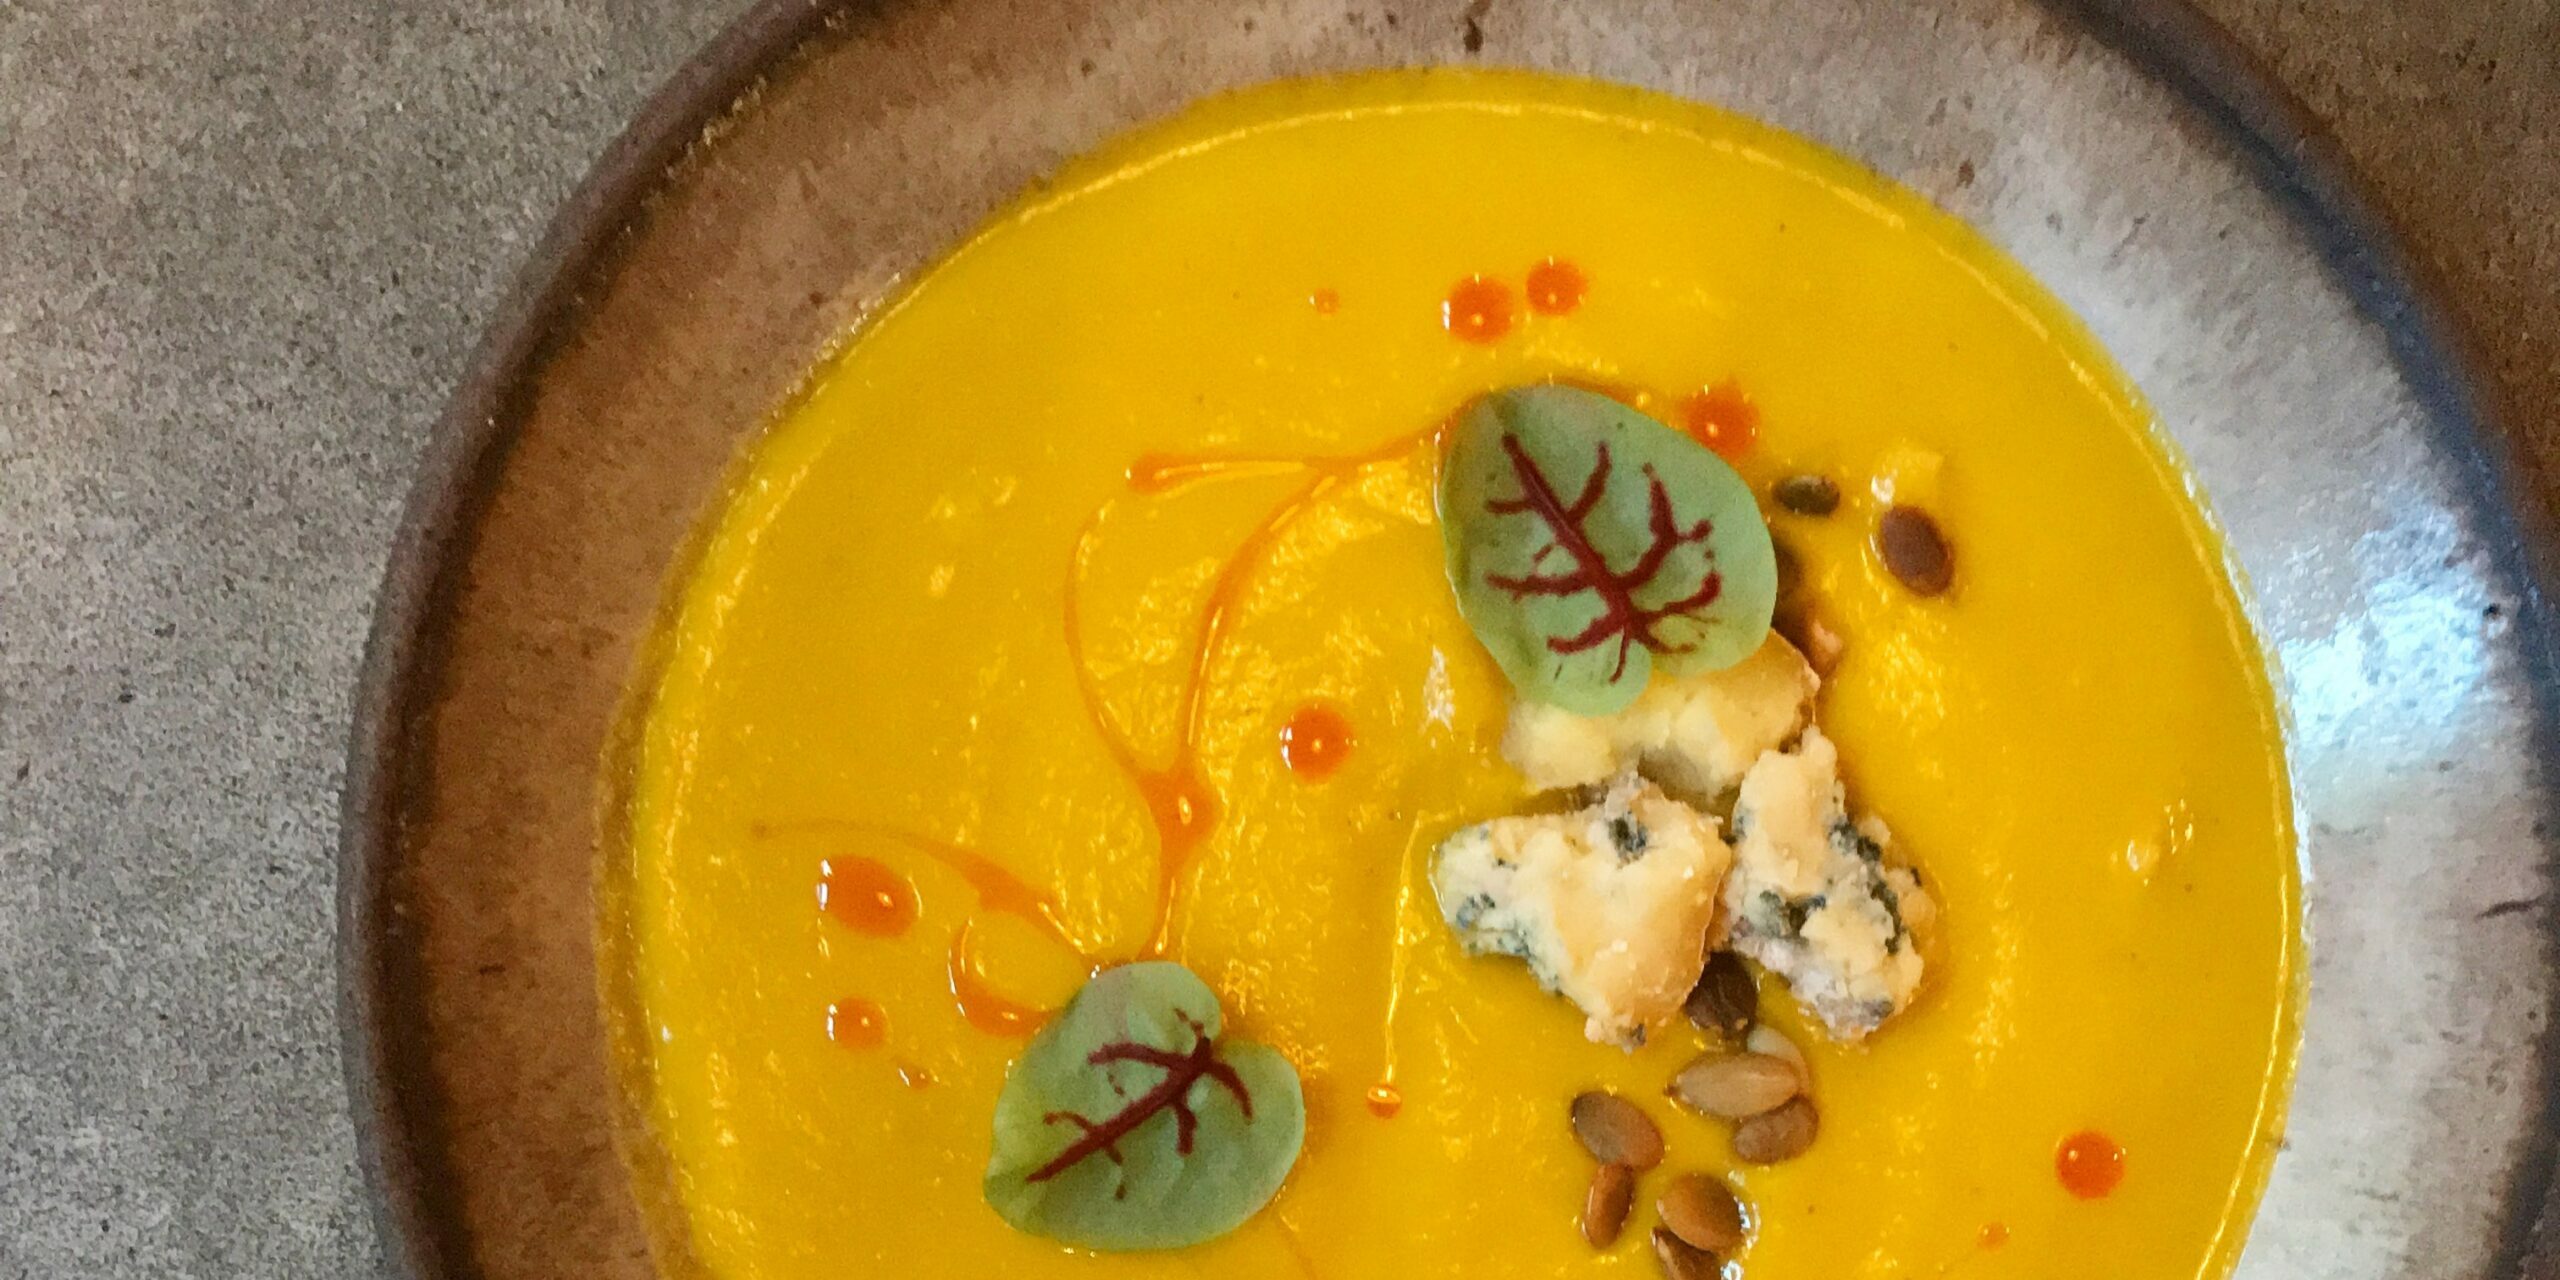 Chef William Dissen's candy roaster soup